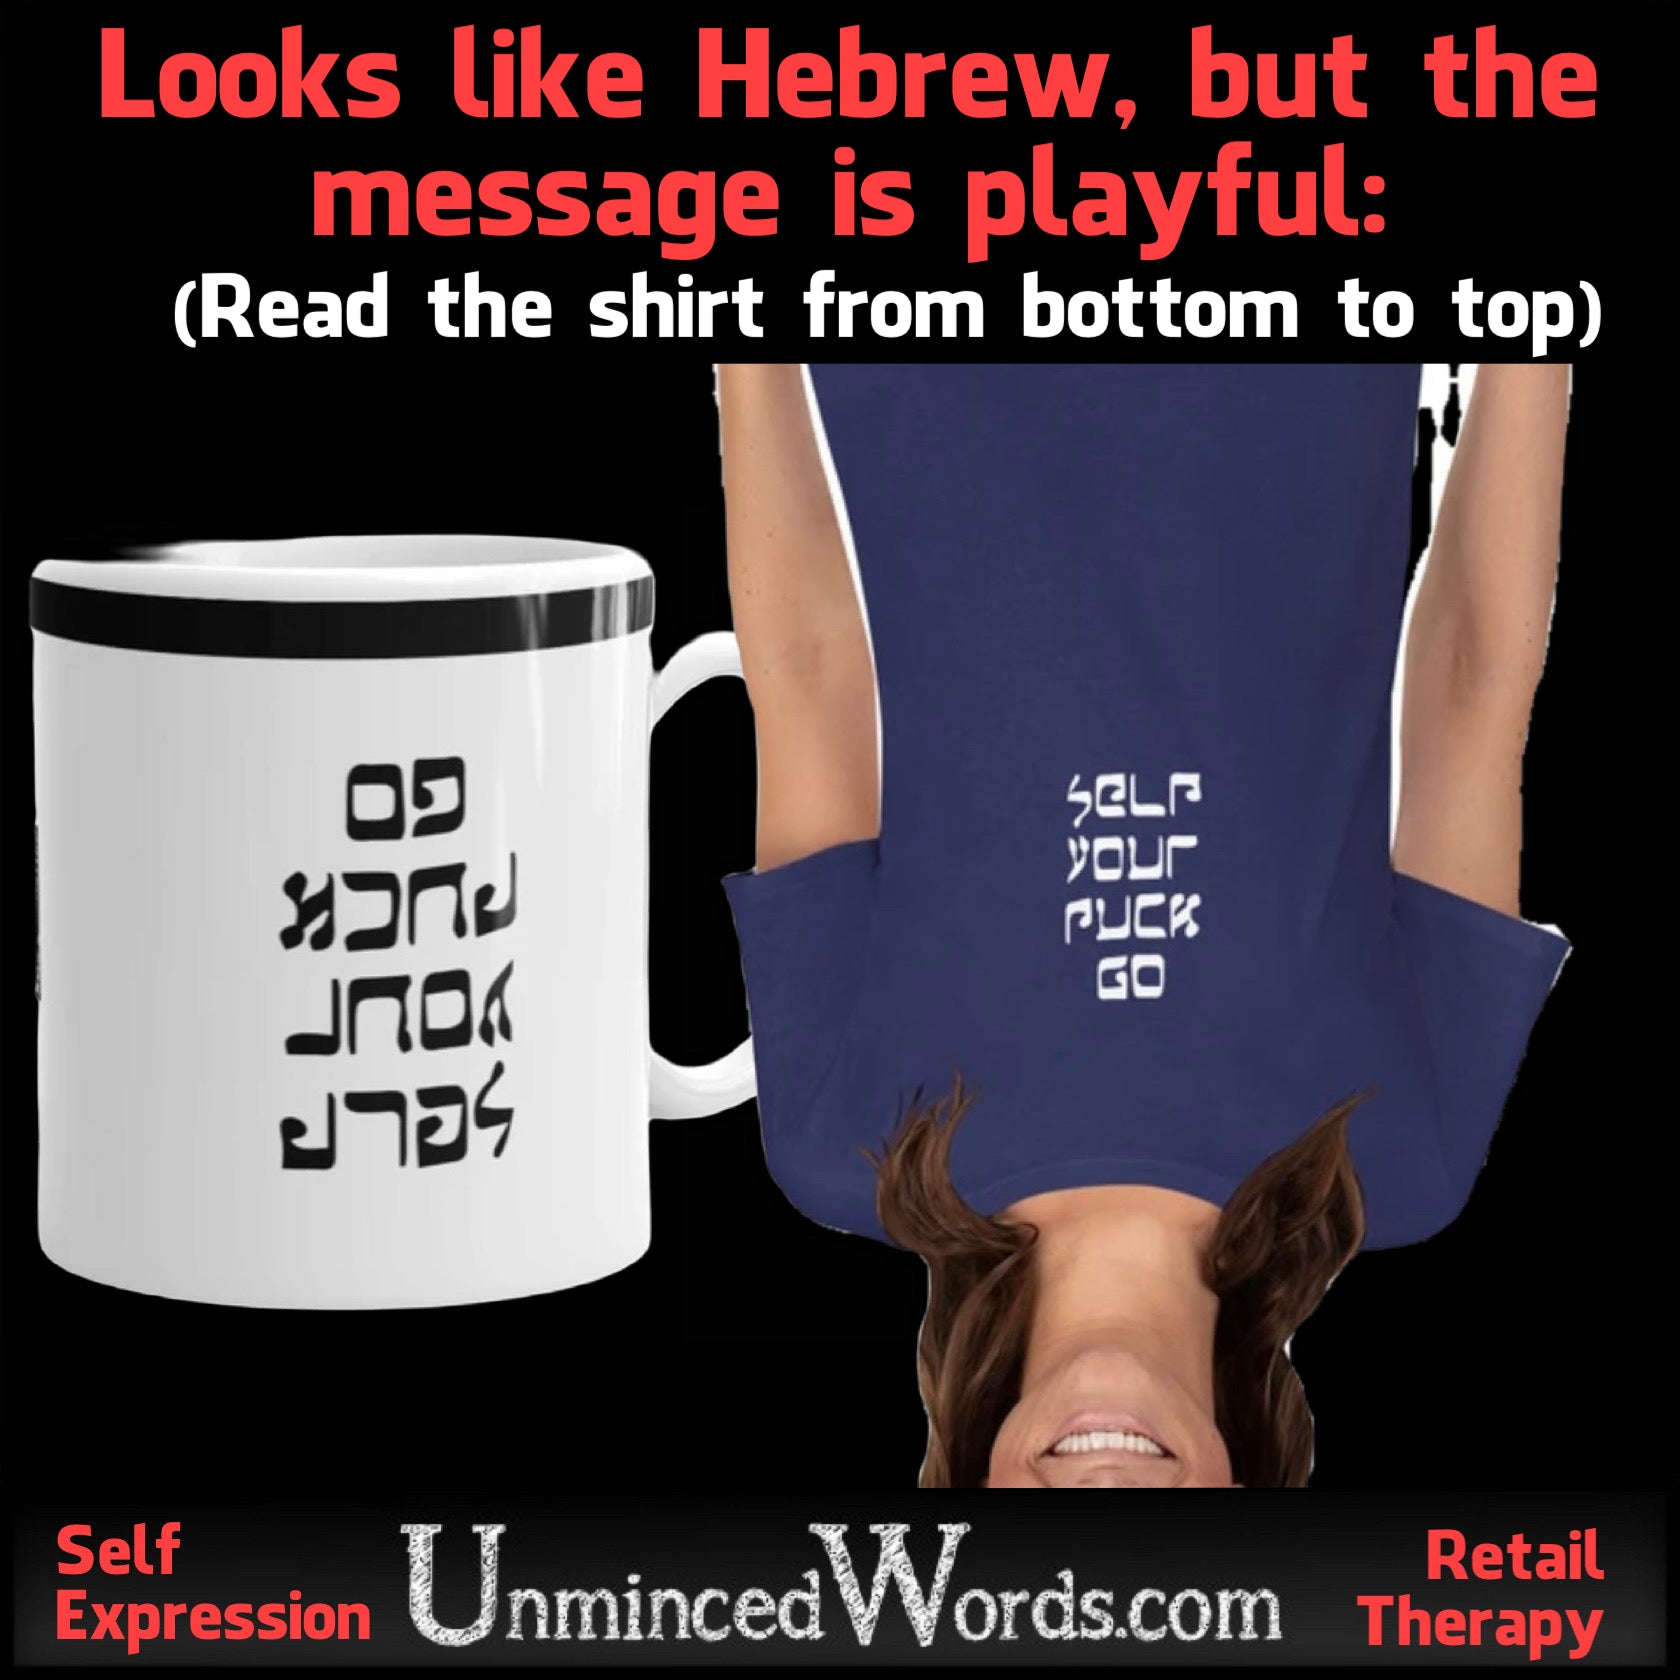 Looks like Hebrew, but the message is playful. Read the shirt from the bottom up.